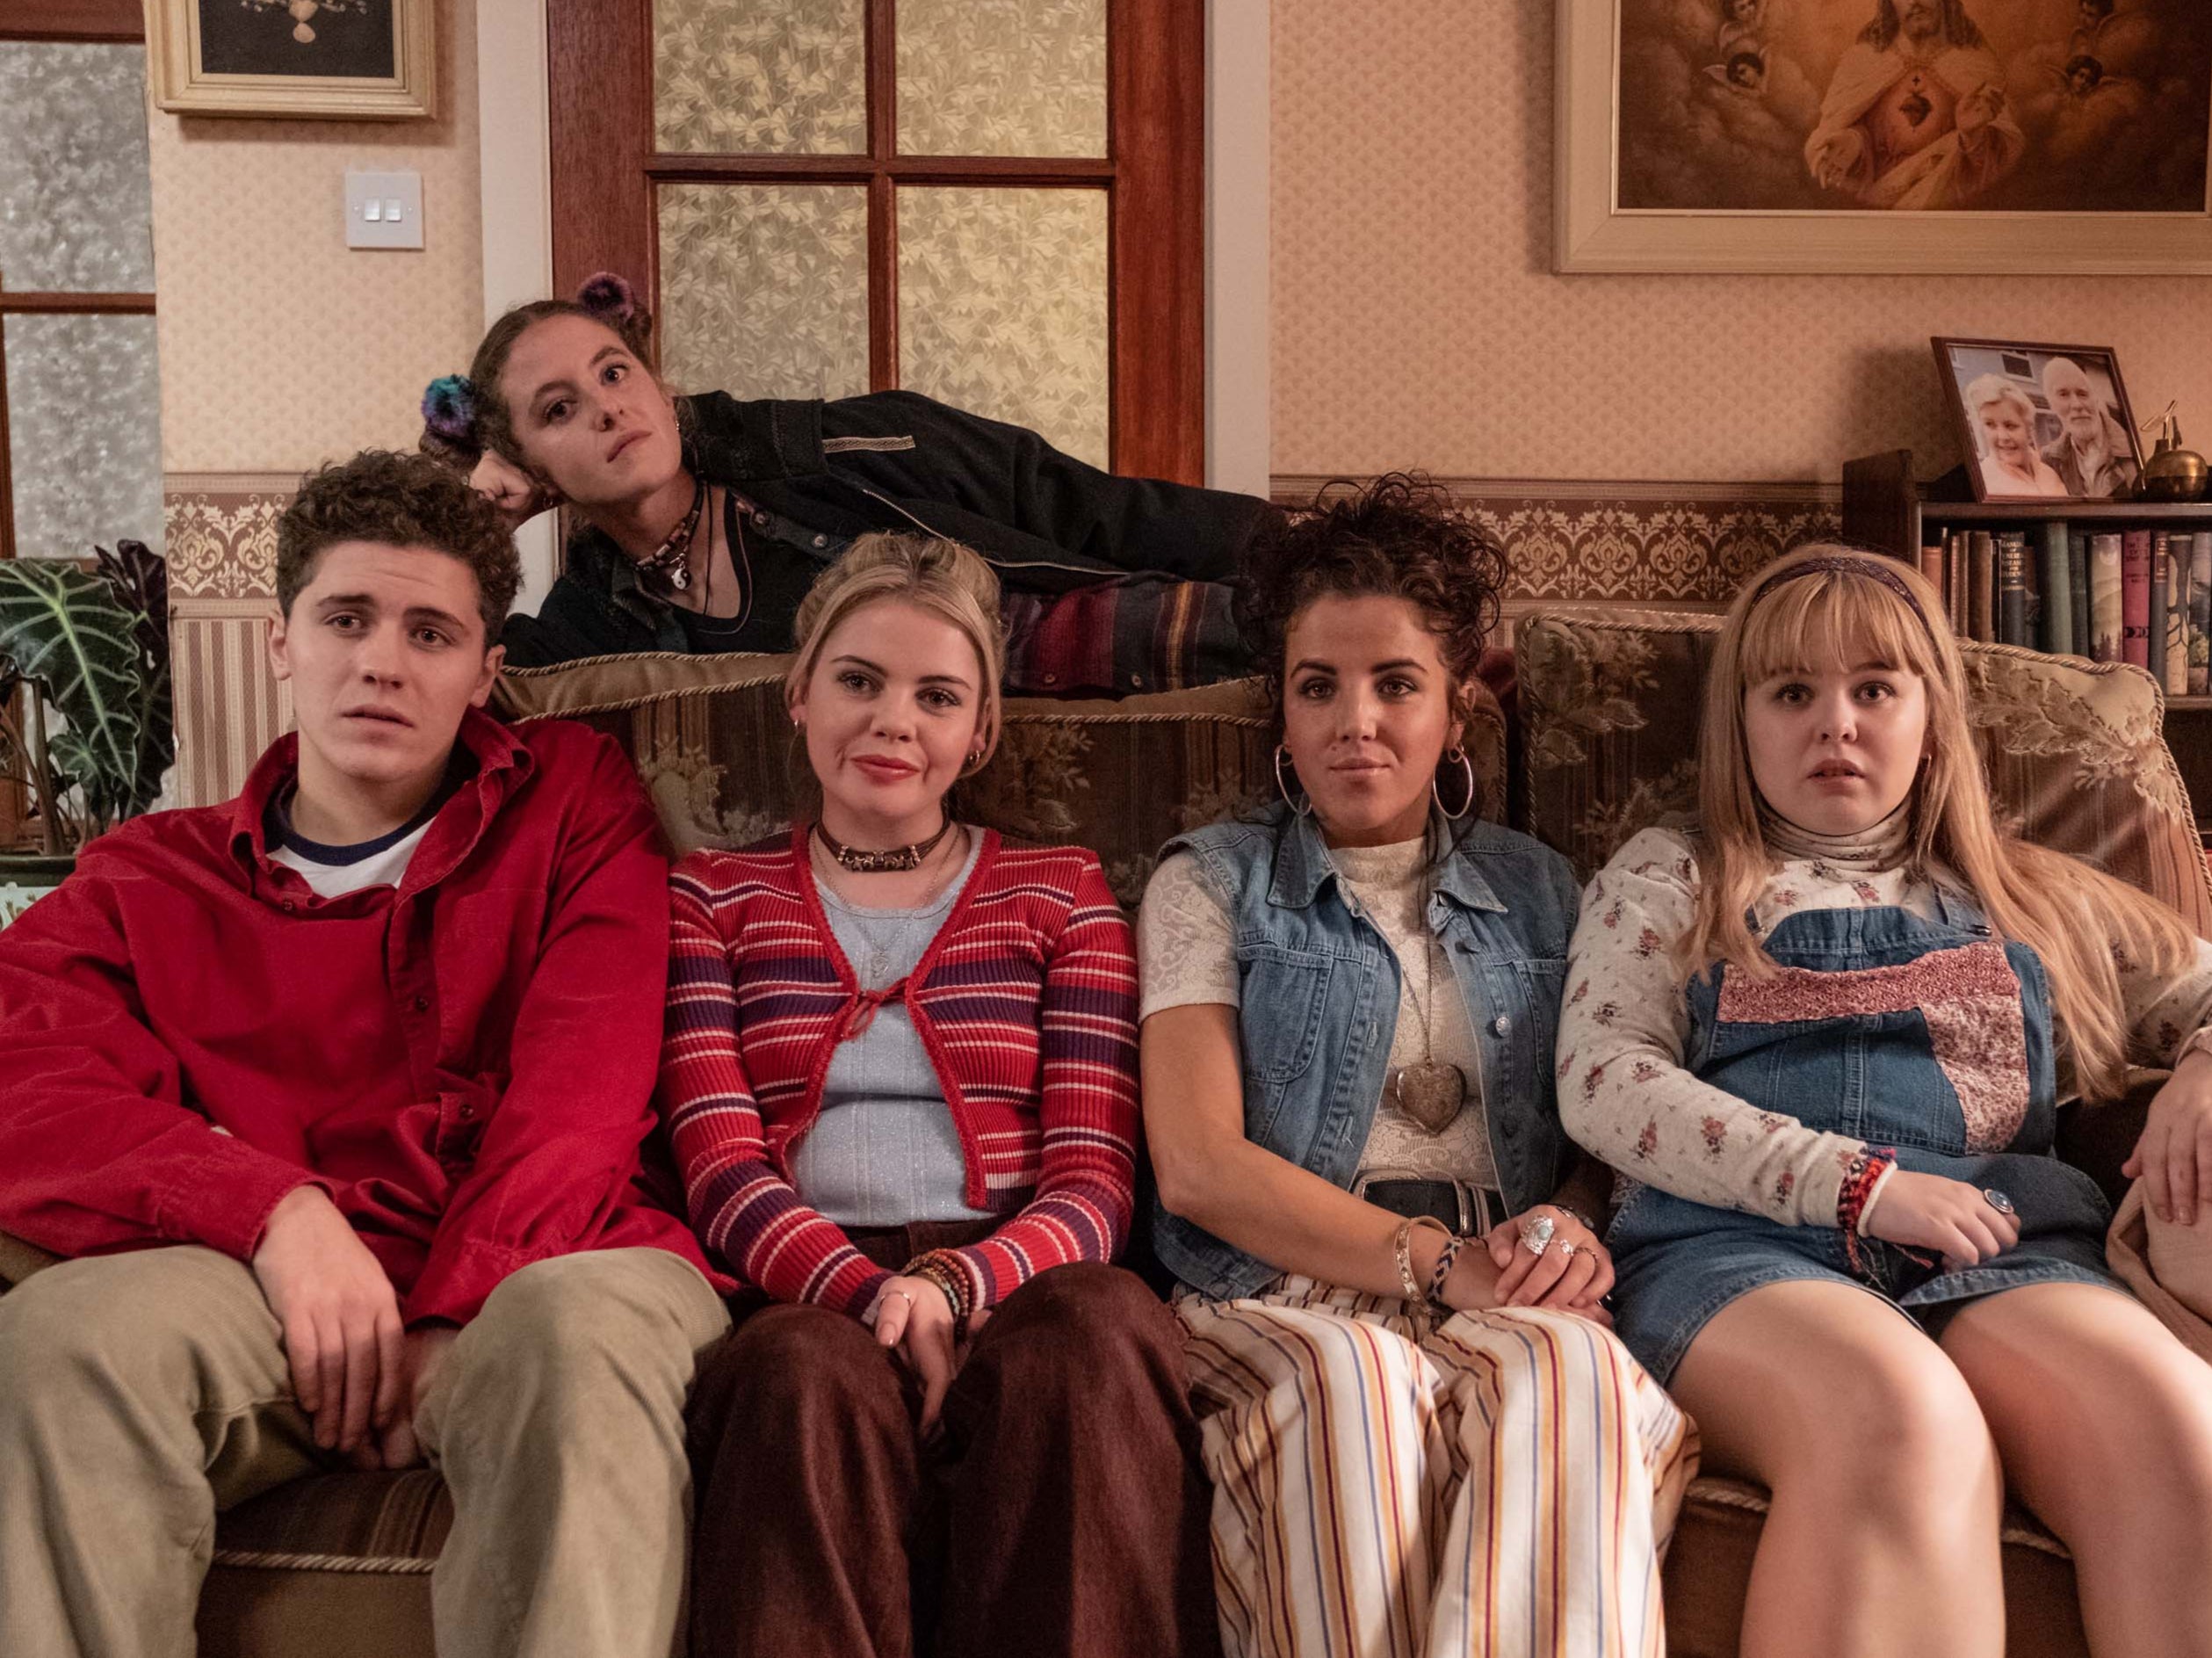 Clockwise from top left: Louisa Clare Harland, Dylan Llewellyn, Nicola Coughlan, O’Donnell, Saoirse Monica-Jackson, Dylan Llewellyn in ‘Derry Girls’